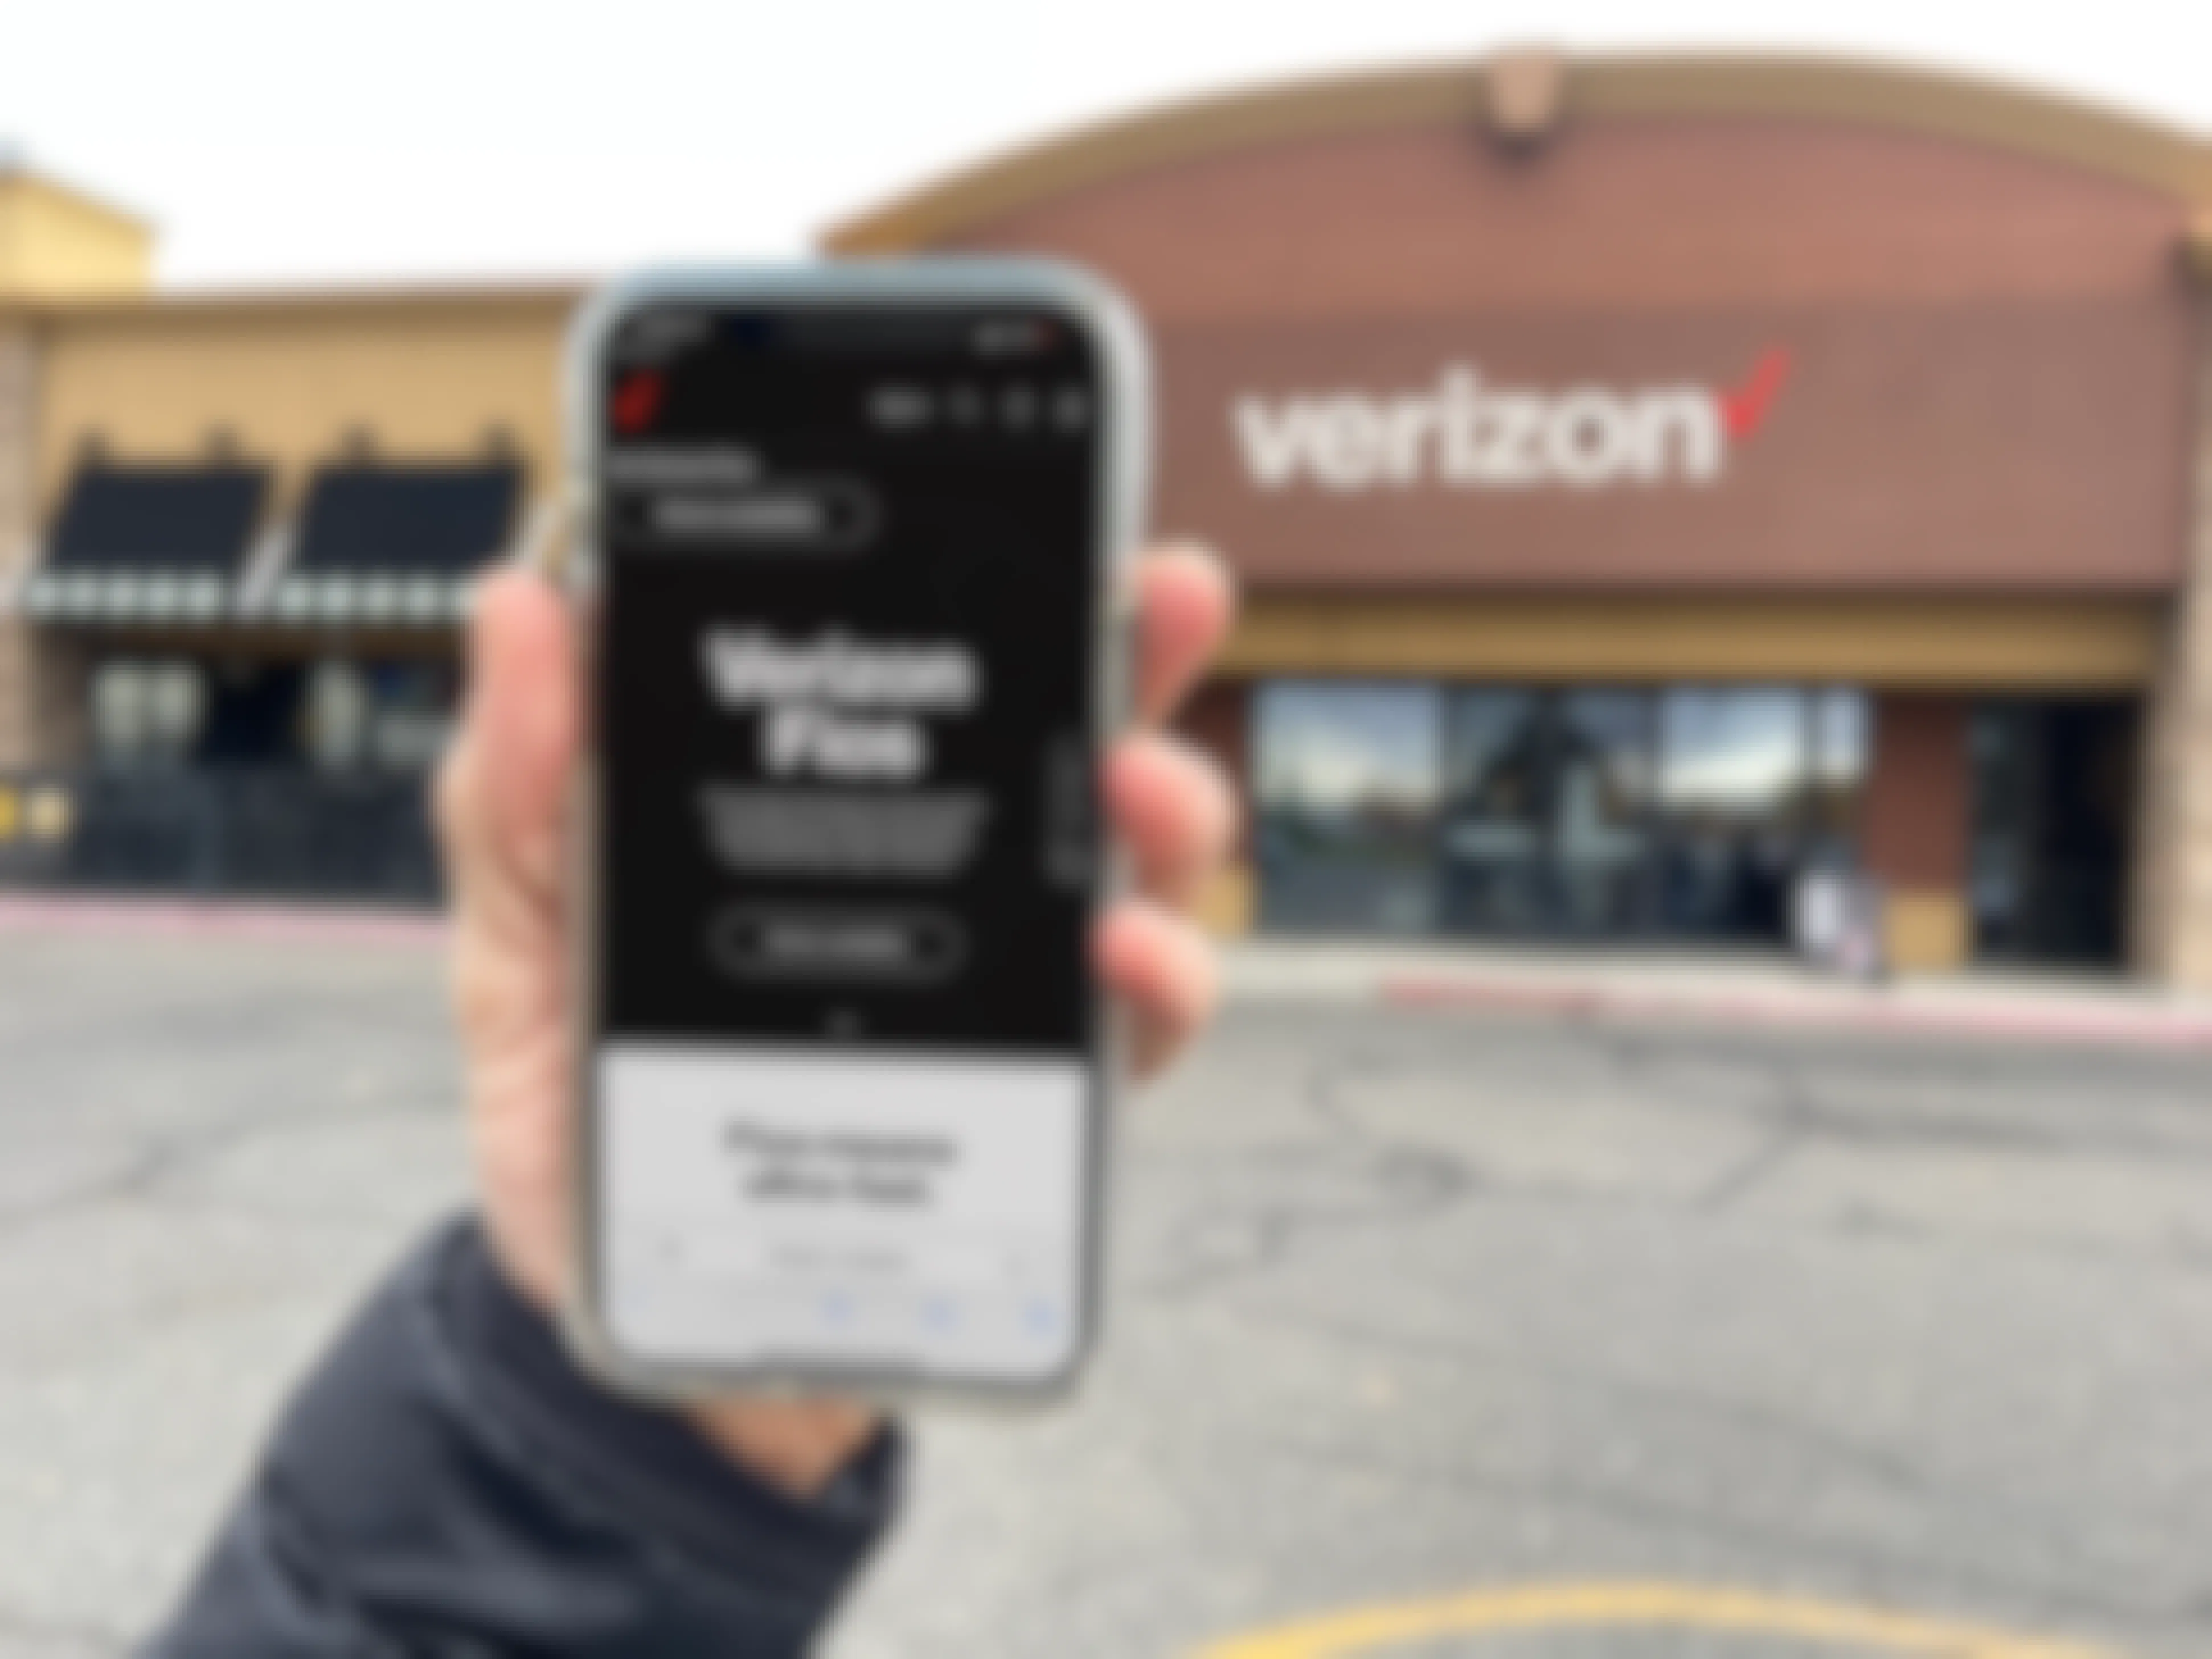 a hand holding a cellphone in front of verizon with verizon app fios on screen